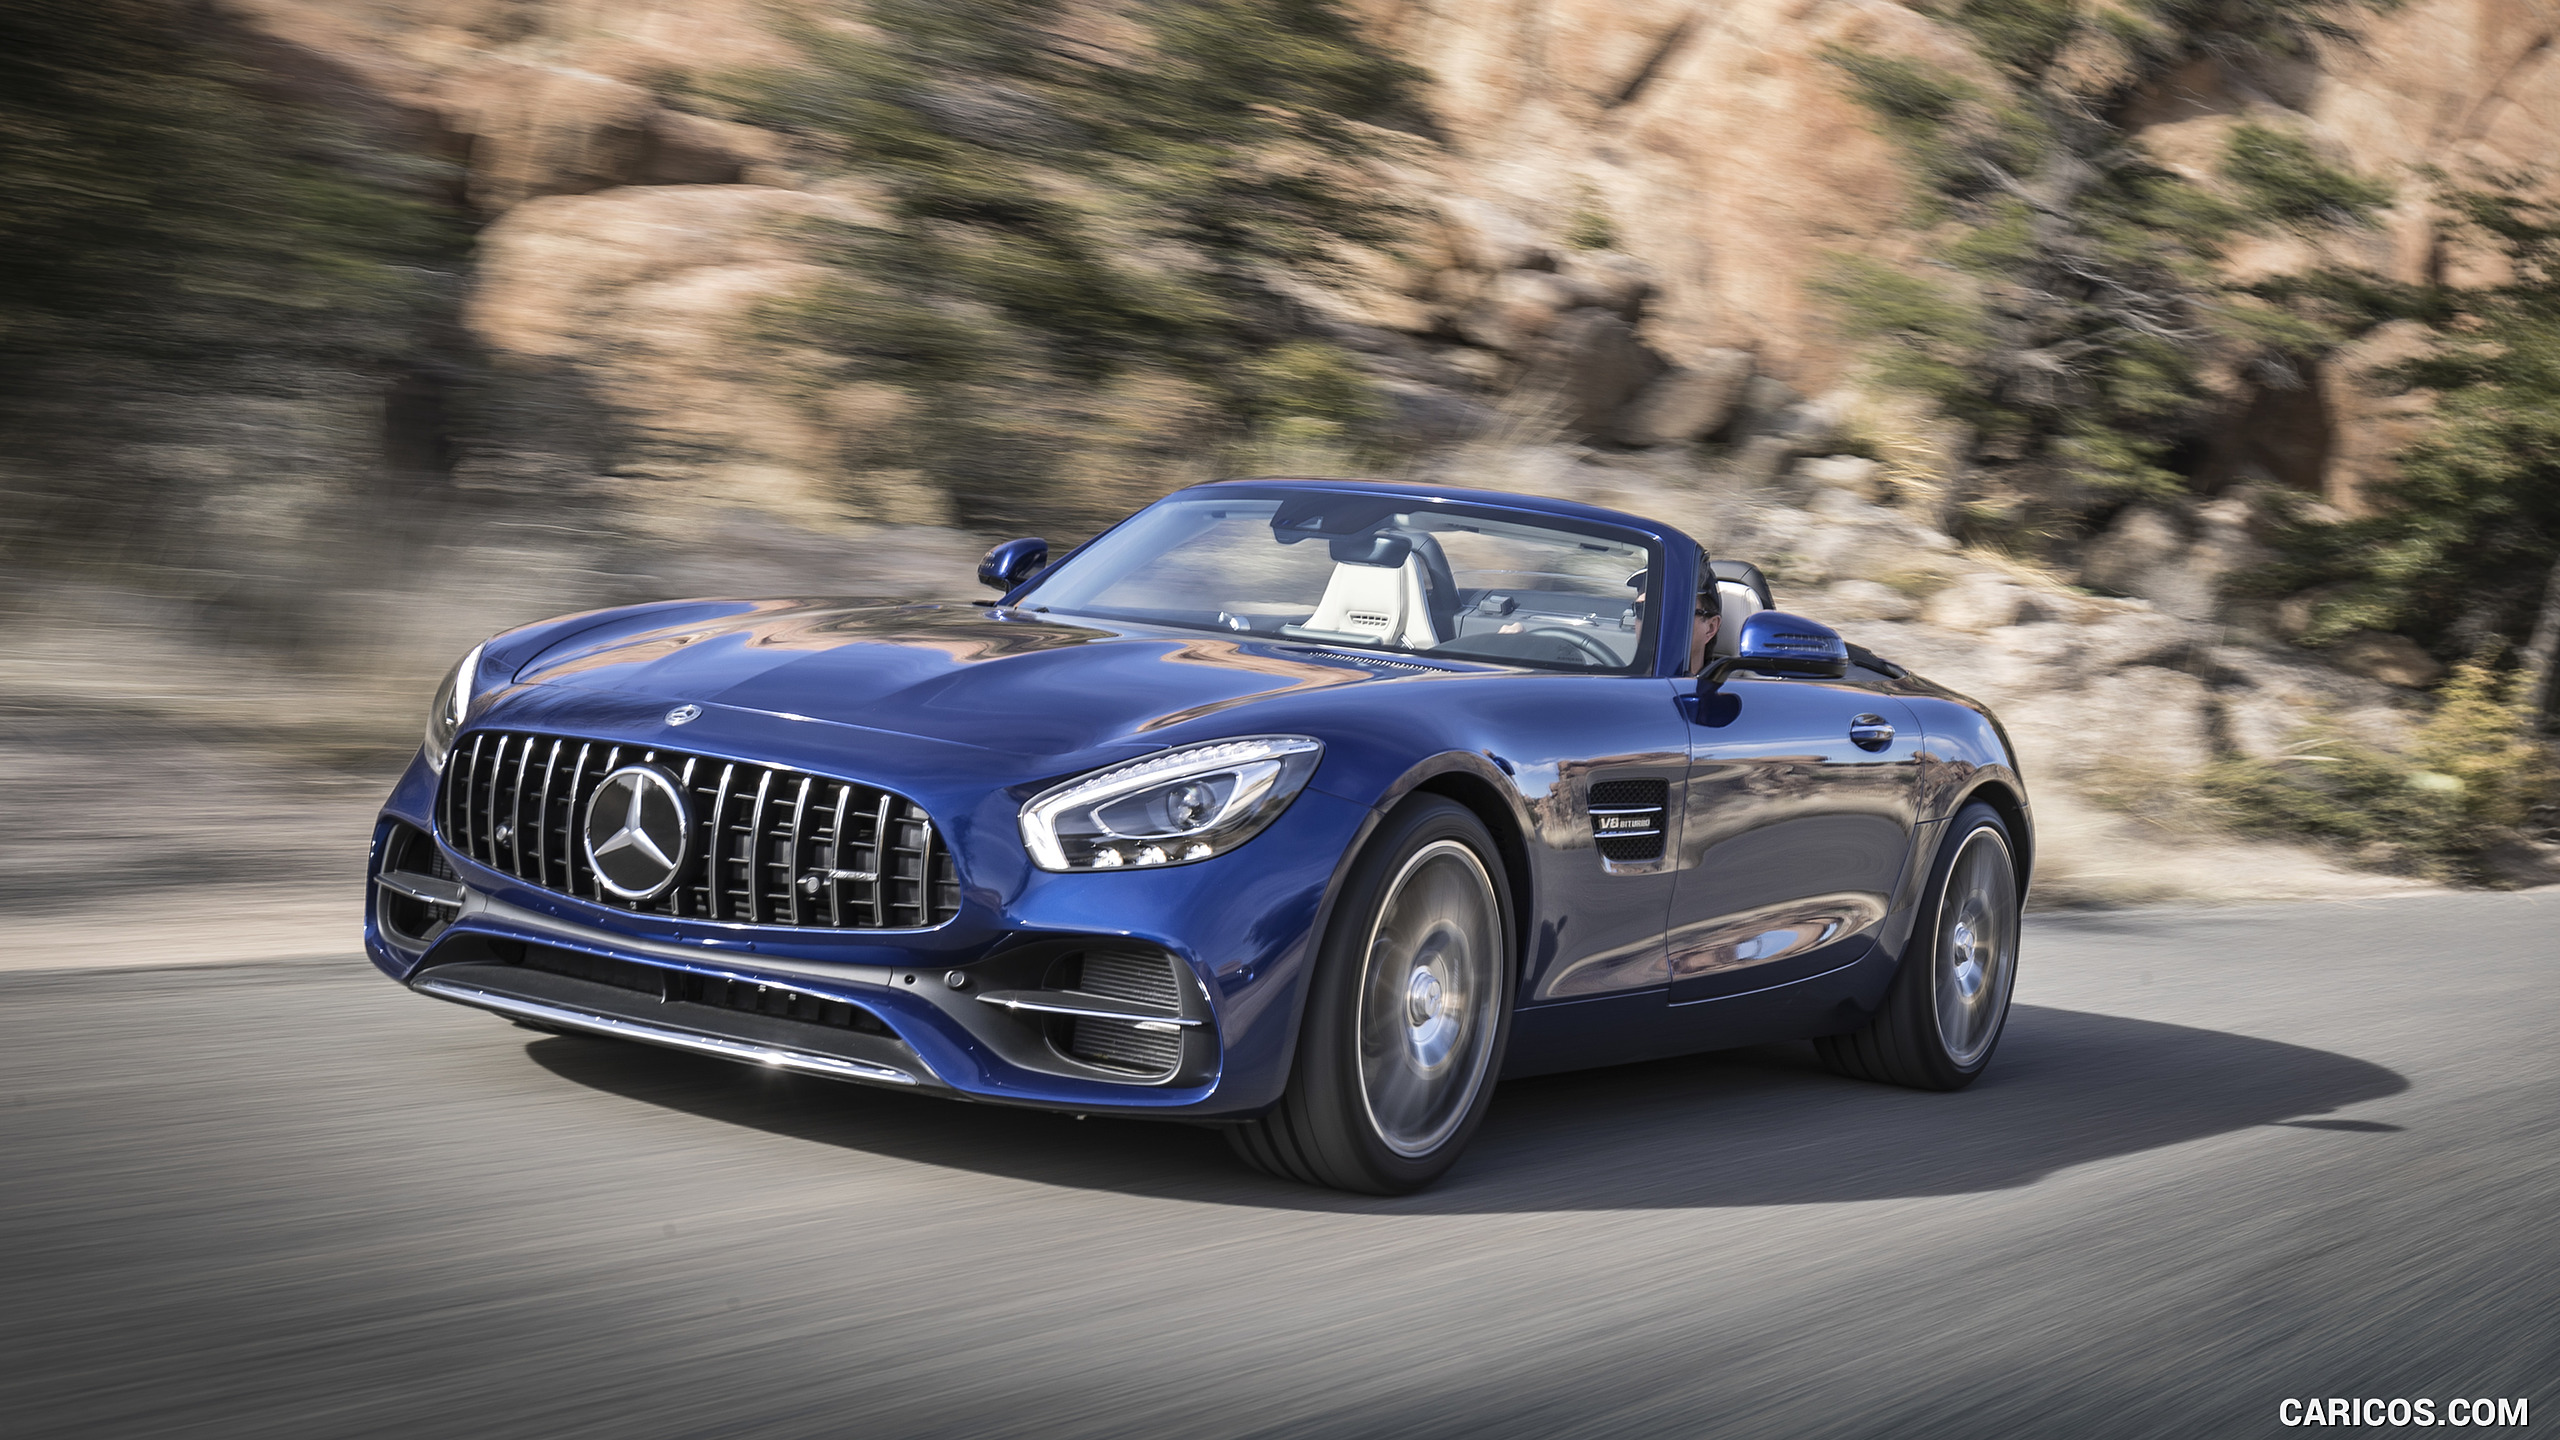 2018 Mercedes-AMG GT Roadster - Front Three-Quarter, #133 of 350